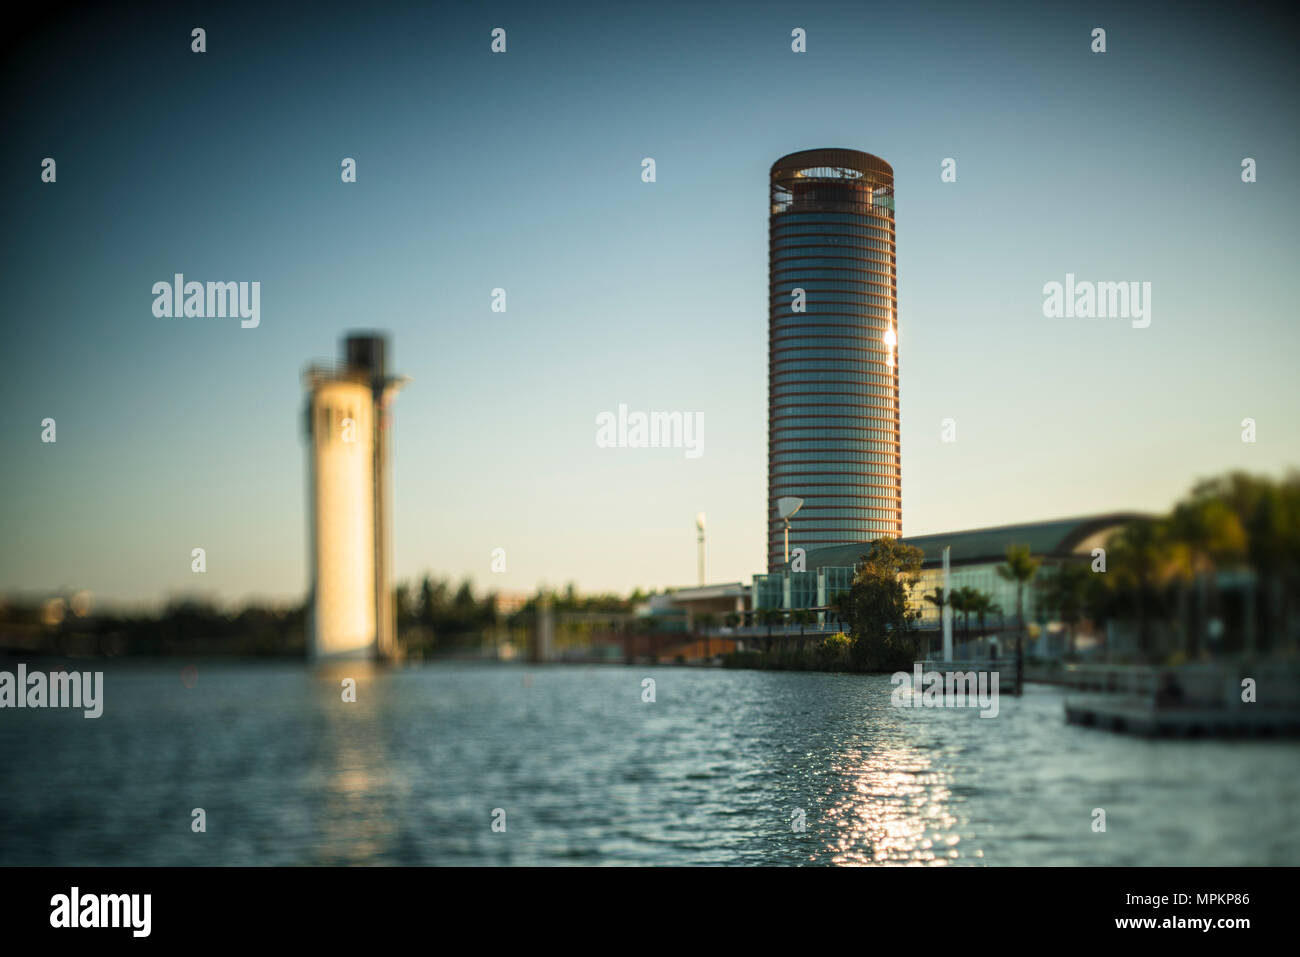 Torre Sevilla skyscraper (right) and Schindler tower (left, out of focus) by the Guadalquivir river, Seville, Spain. Shallow depth of field achieved b Stock Photo